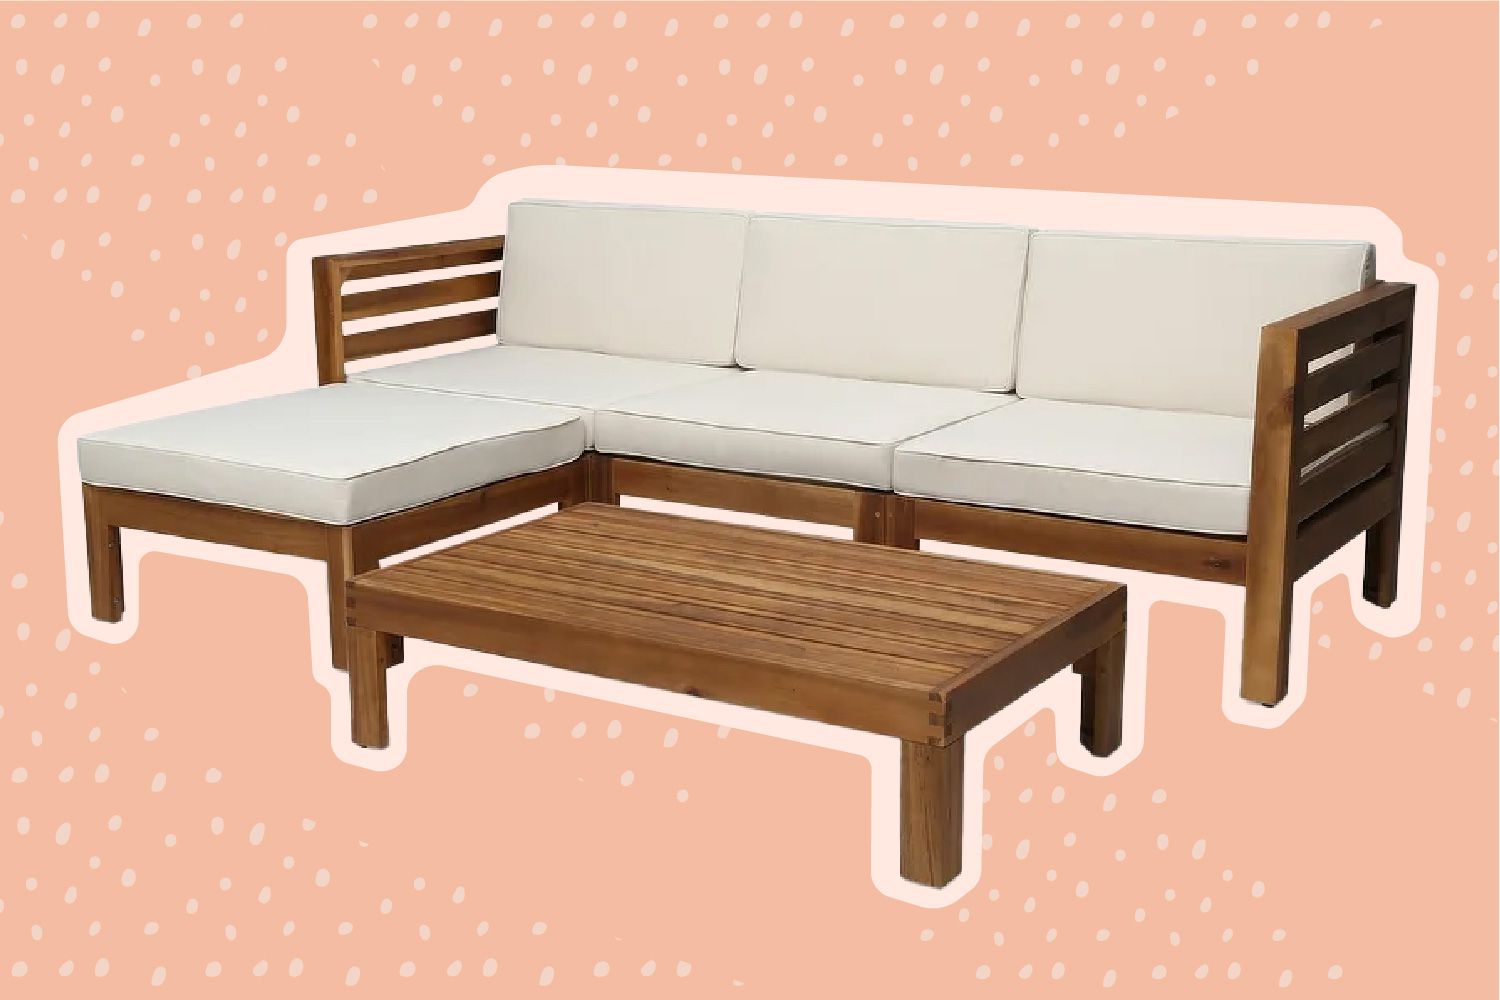 The Best Outdoor Furniture to Revamp Your Yard